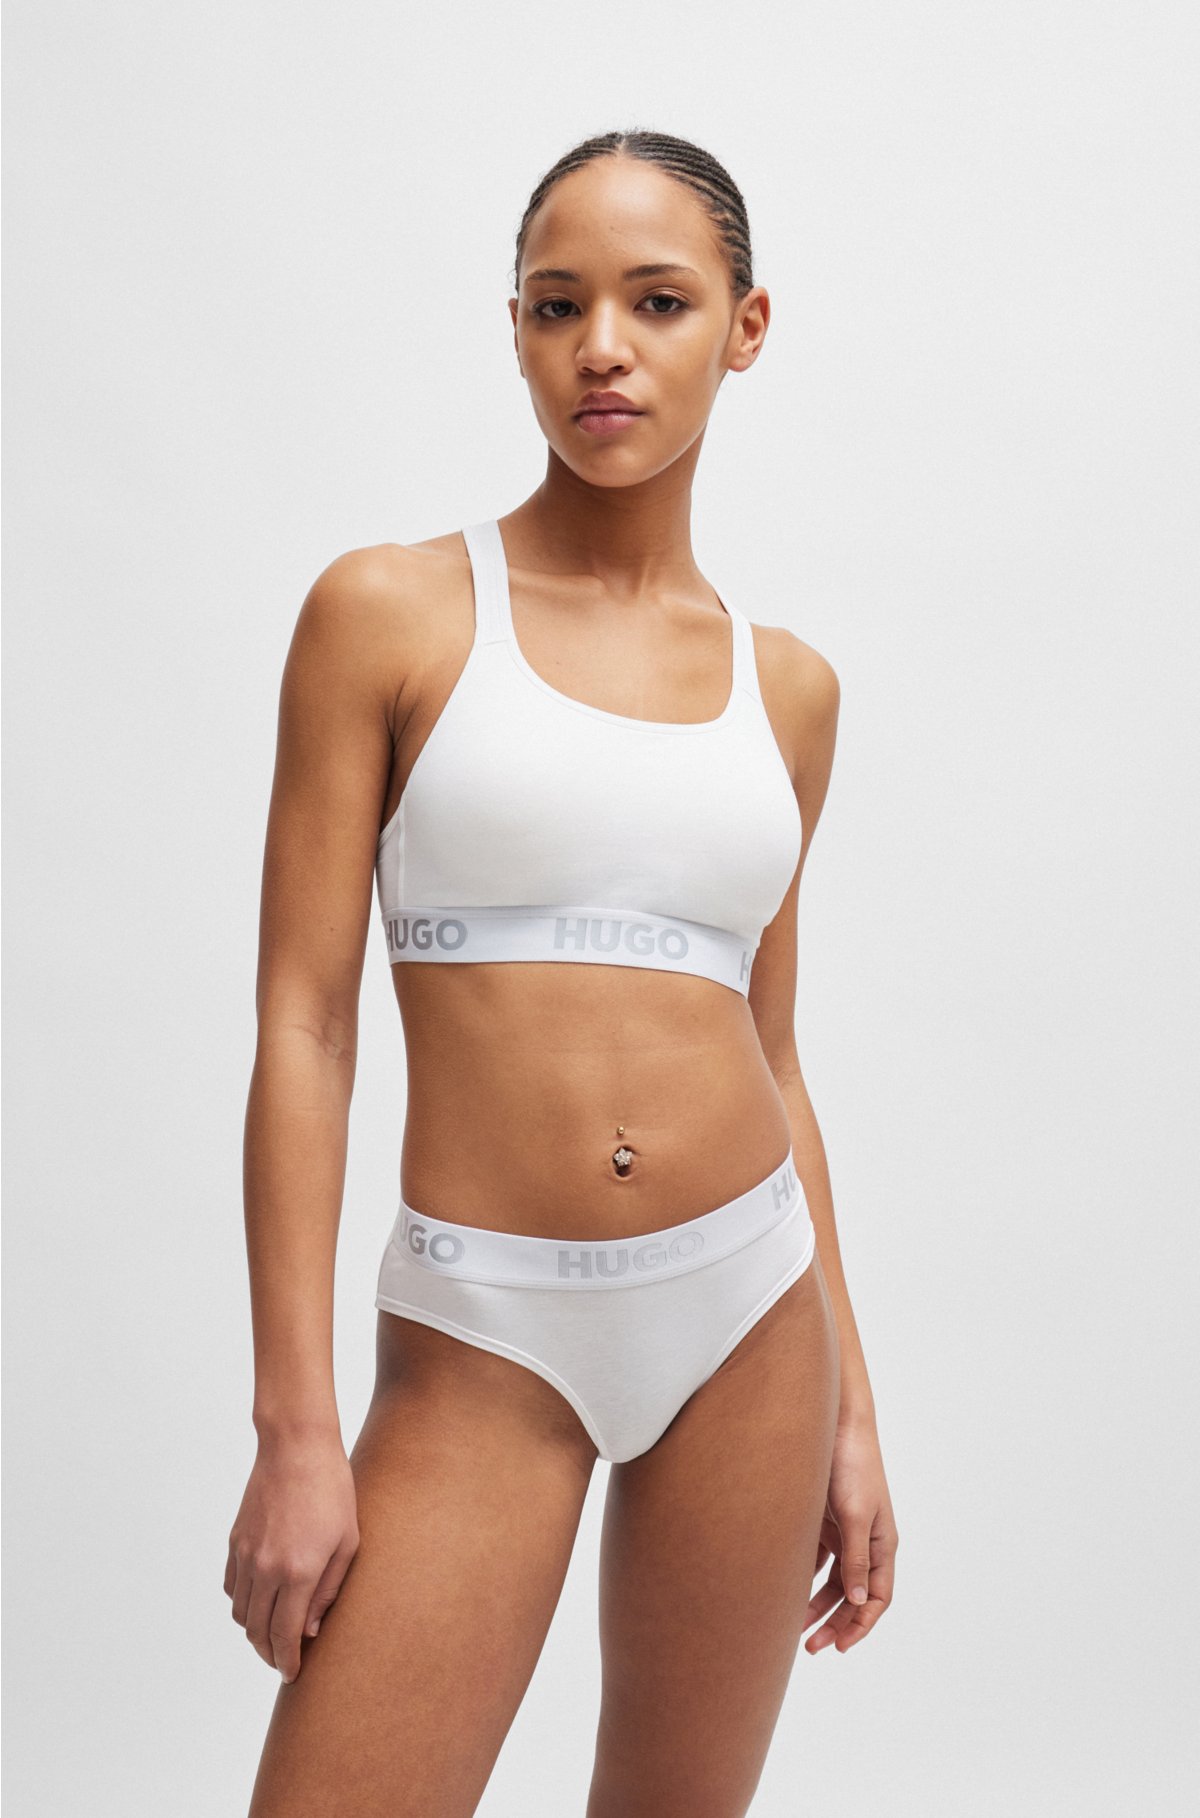 HUGO - in stretch bra with repeat Sports cotton logos